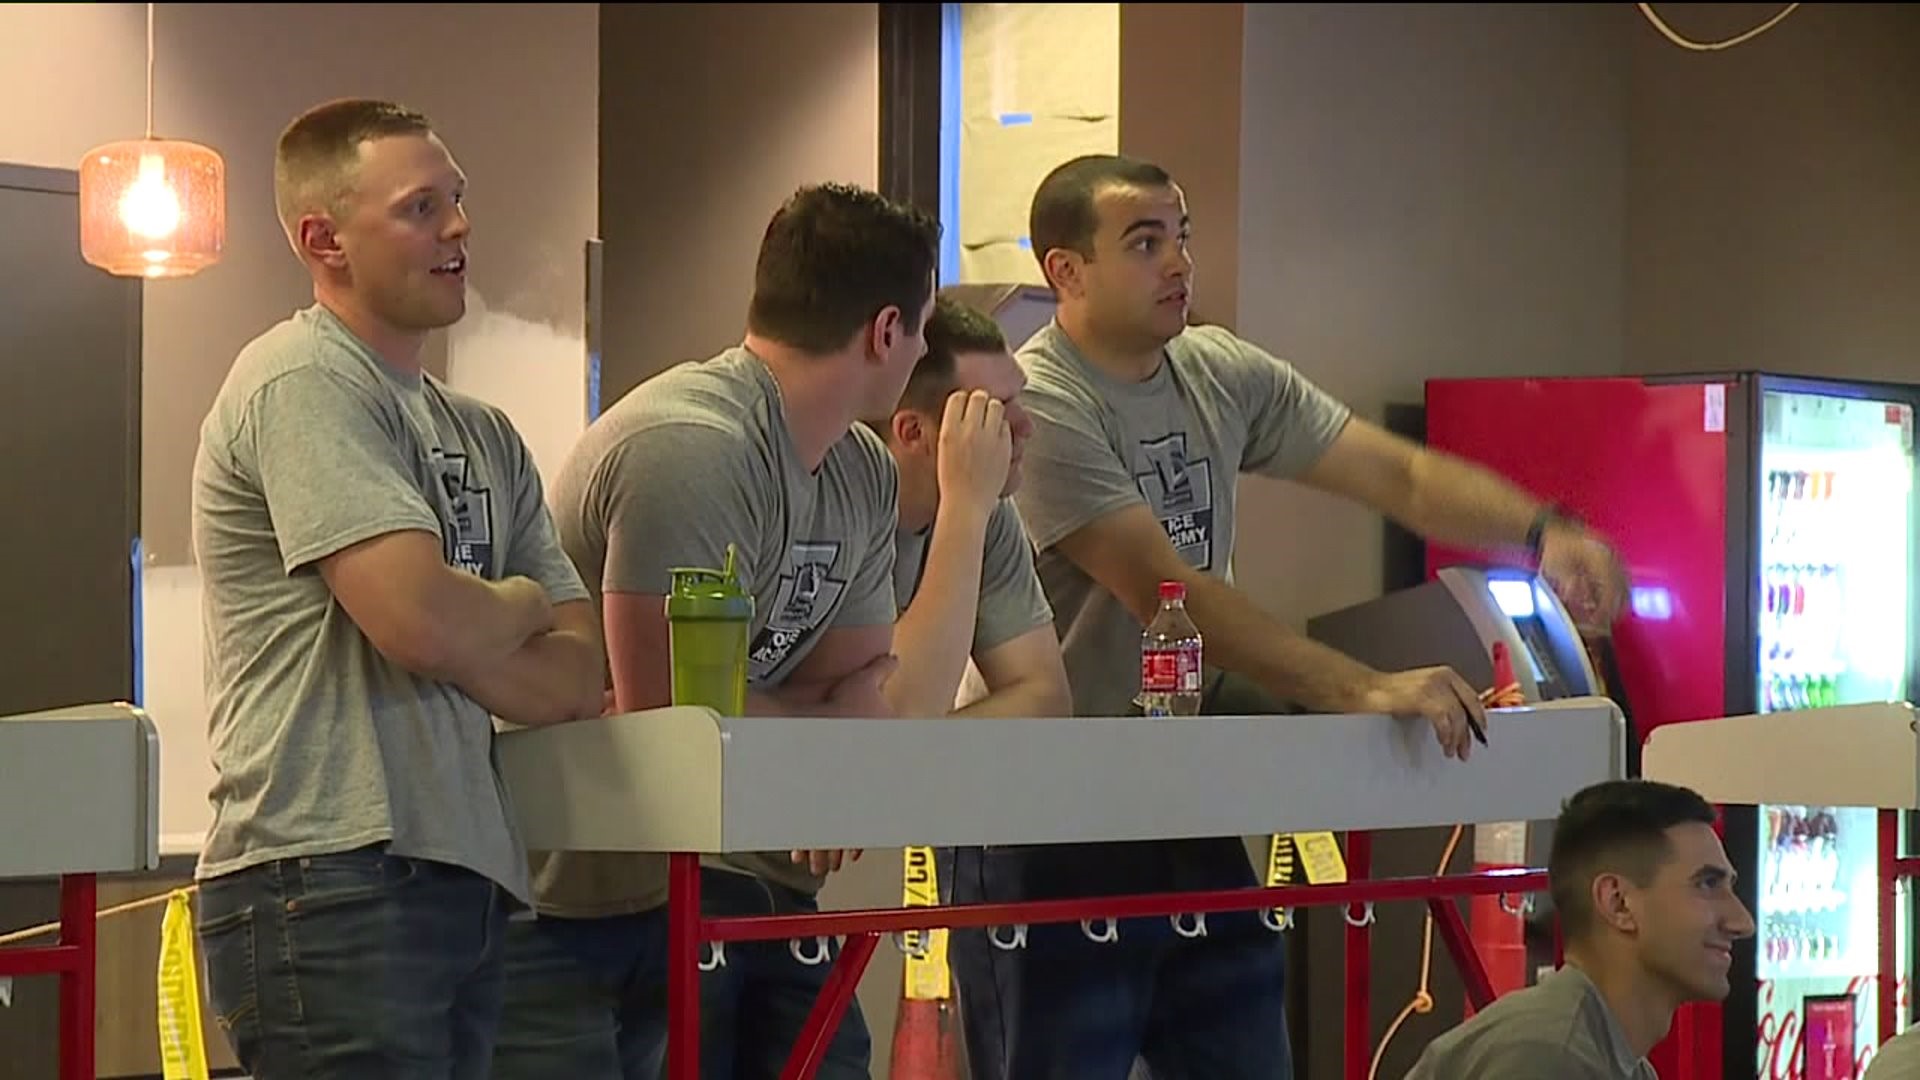 Bowling to Raise Money for Scholarship Fund Named in Honor of Fallen Trooper